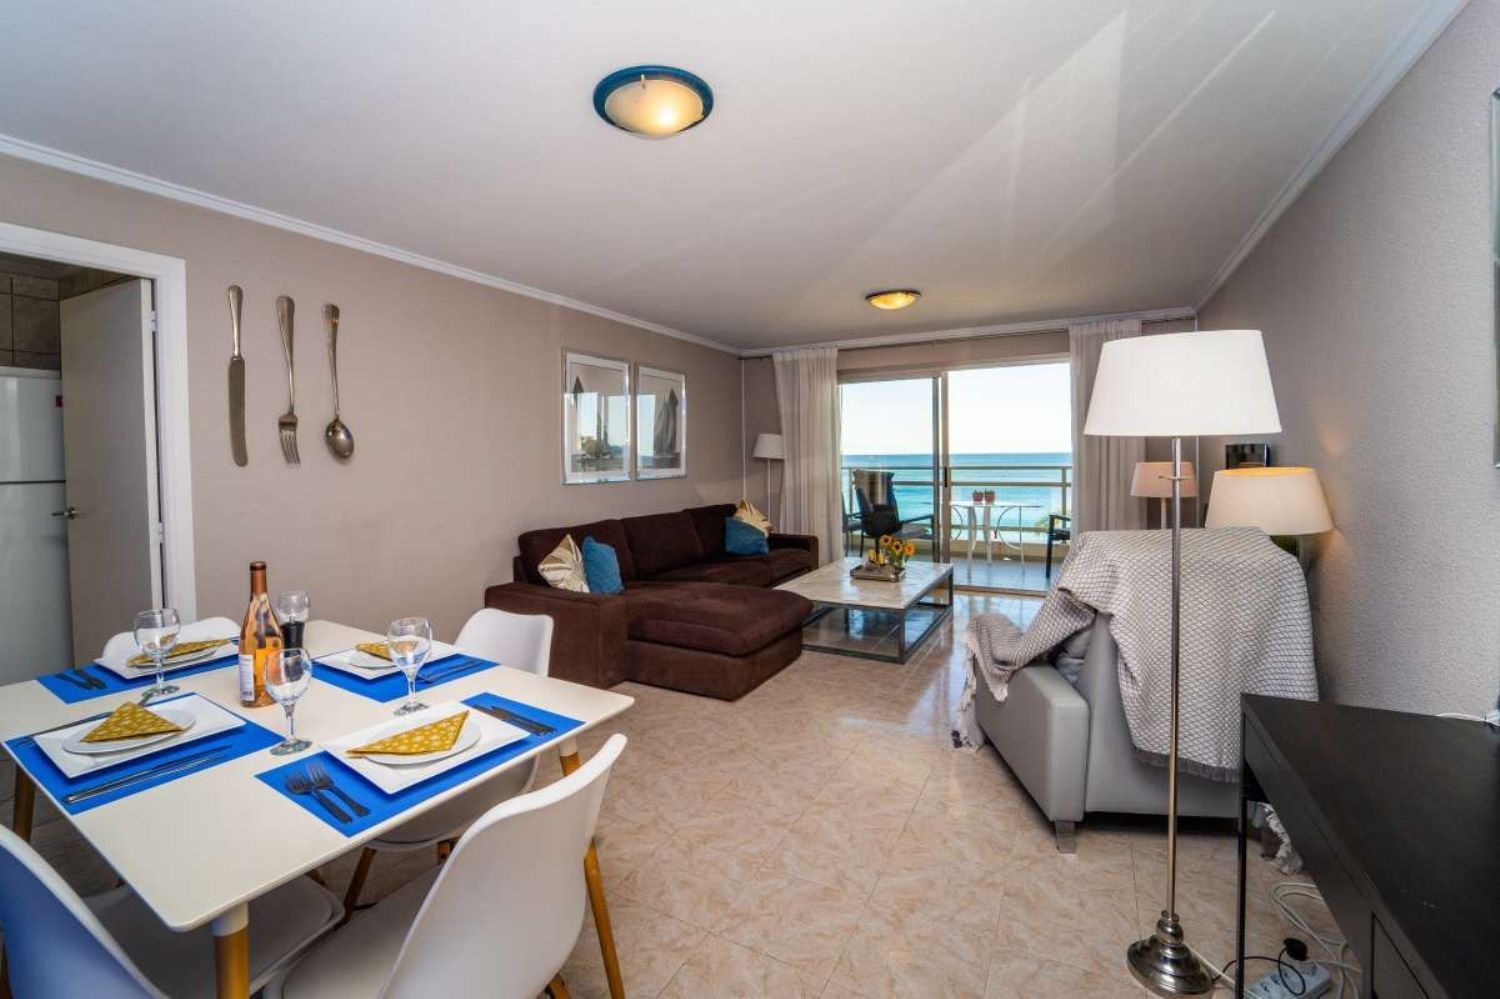 Apartment for sale on the seafront in Edificio Frentemar, Calpe